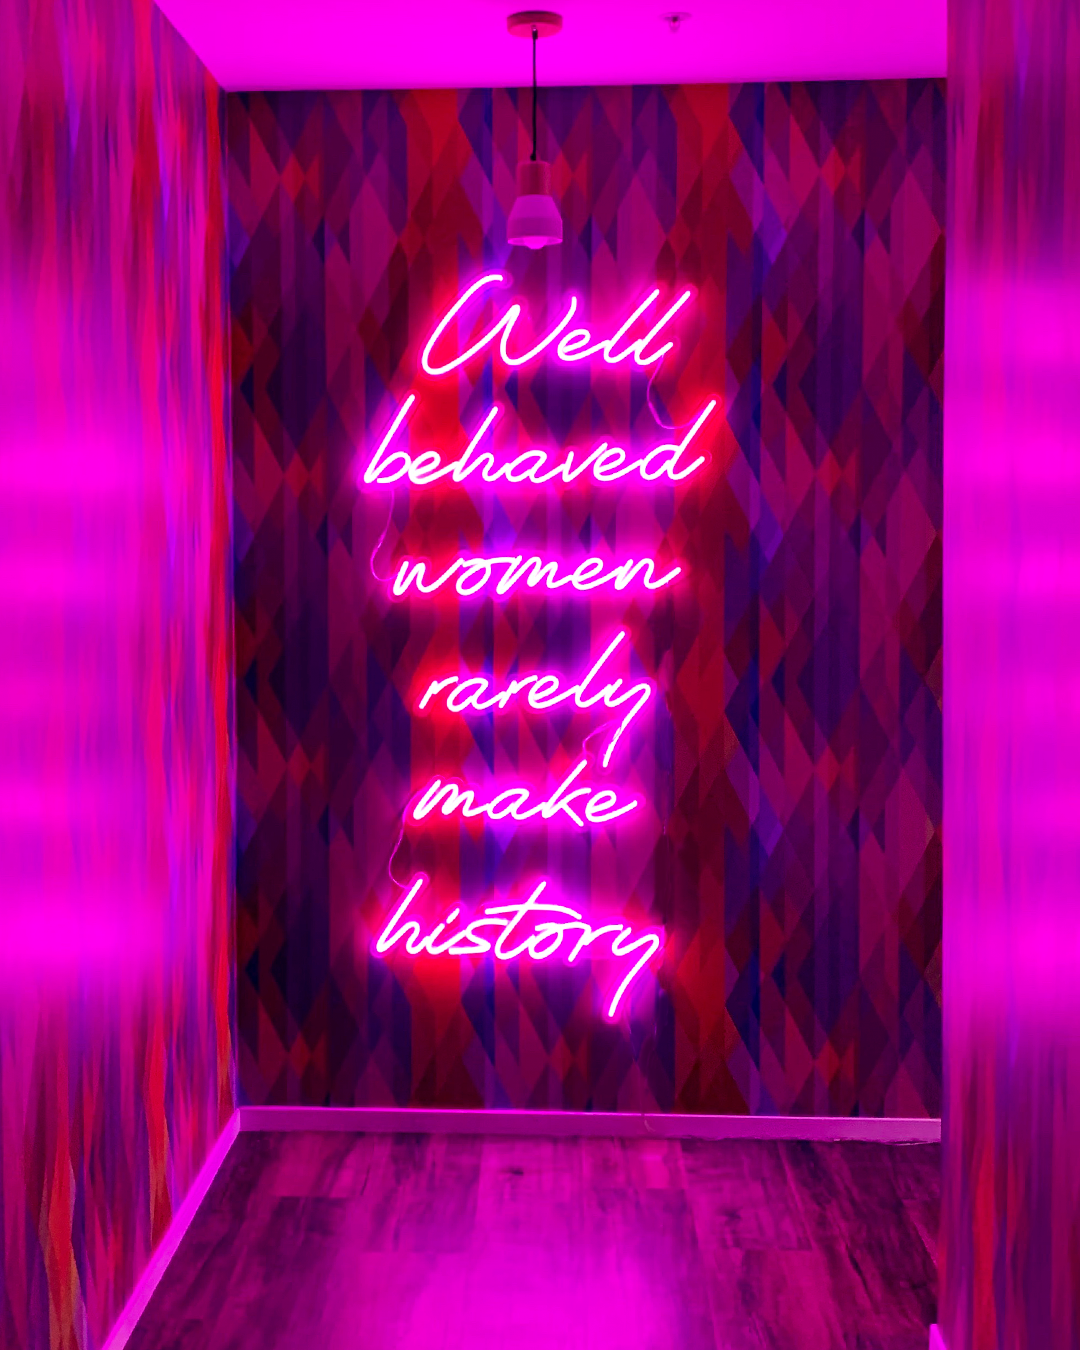  personalized neon sign saying ‘well behaved women rarely make history’